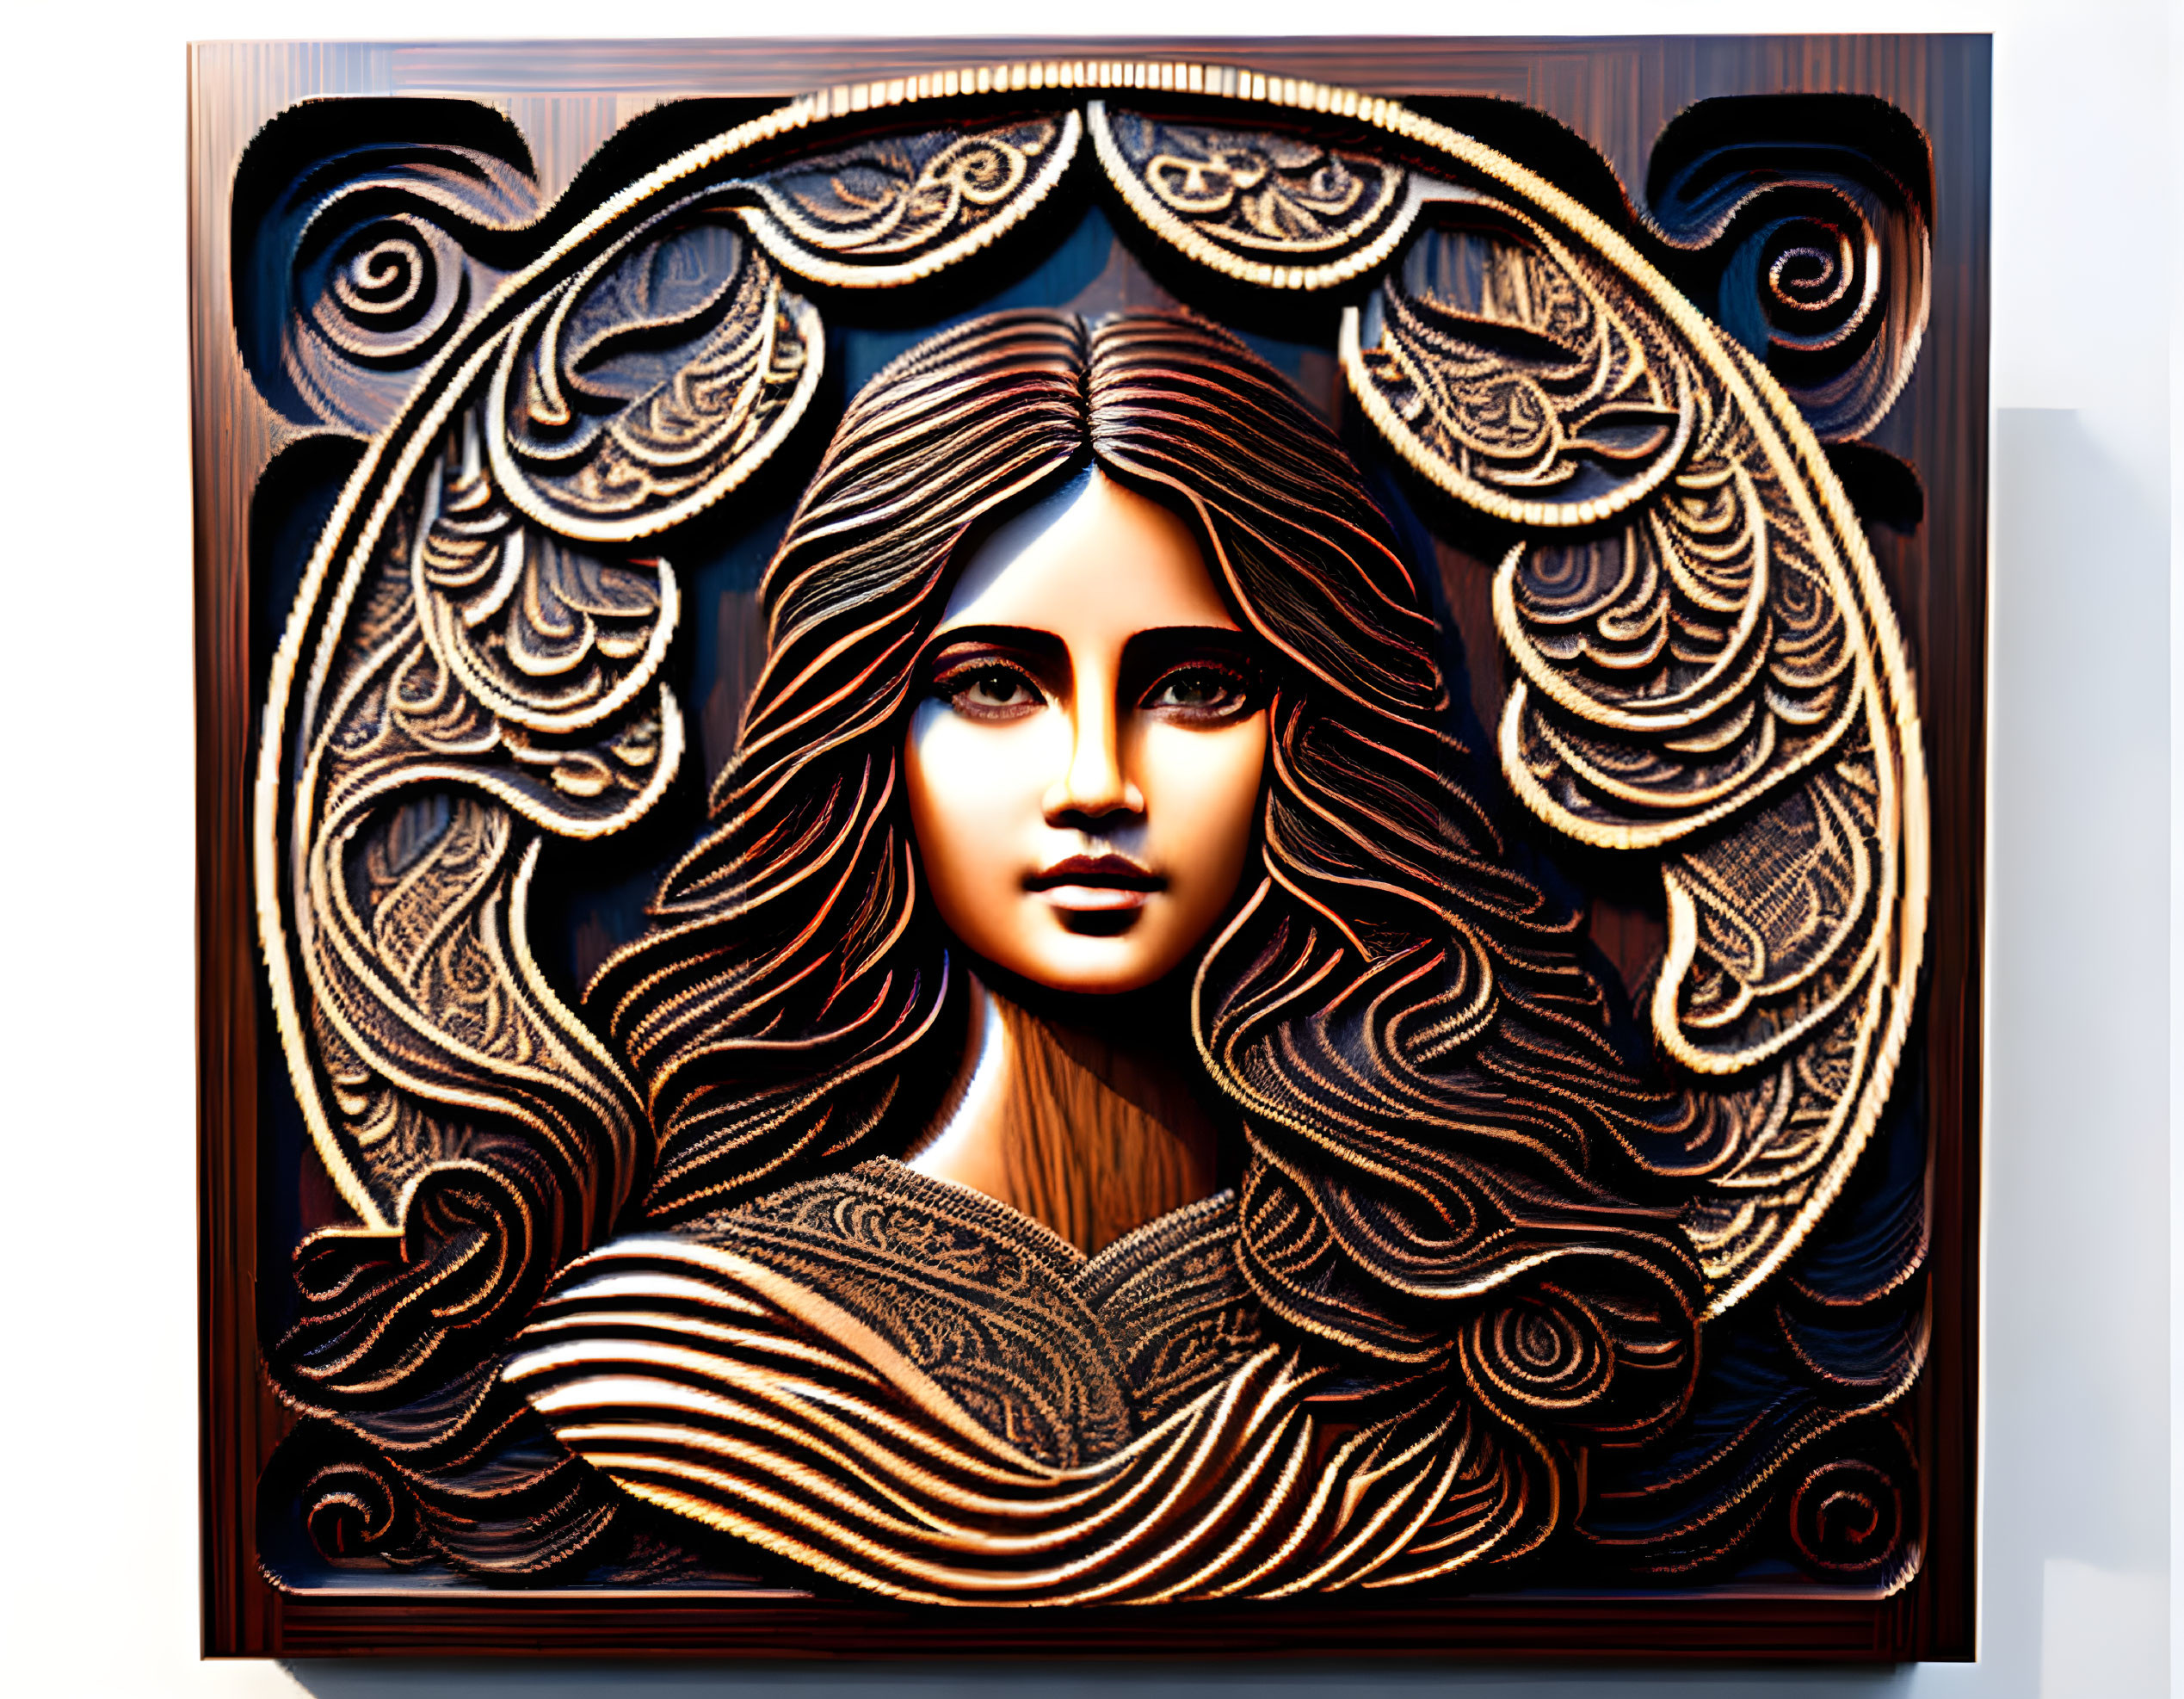 Stylized woman wooden artwork with ornate carvings